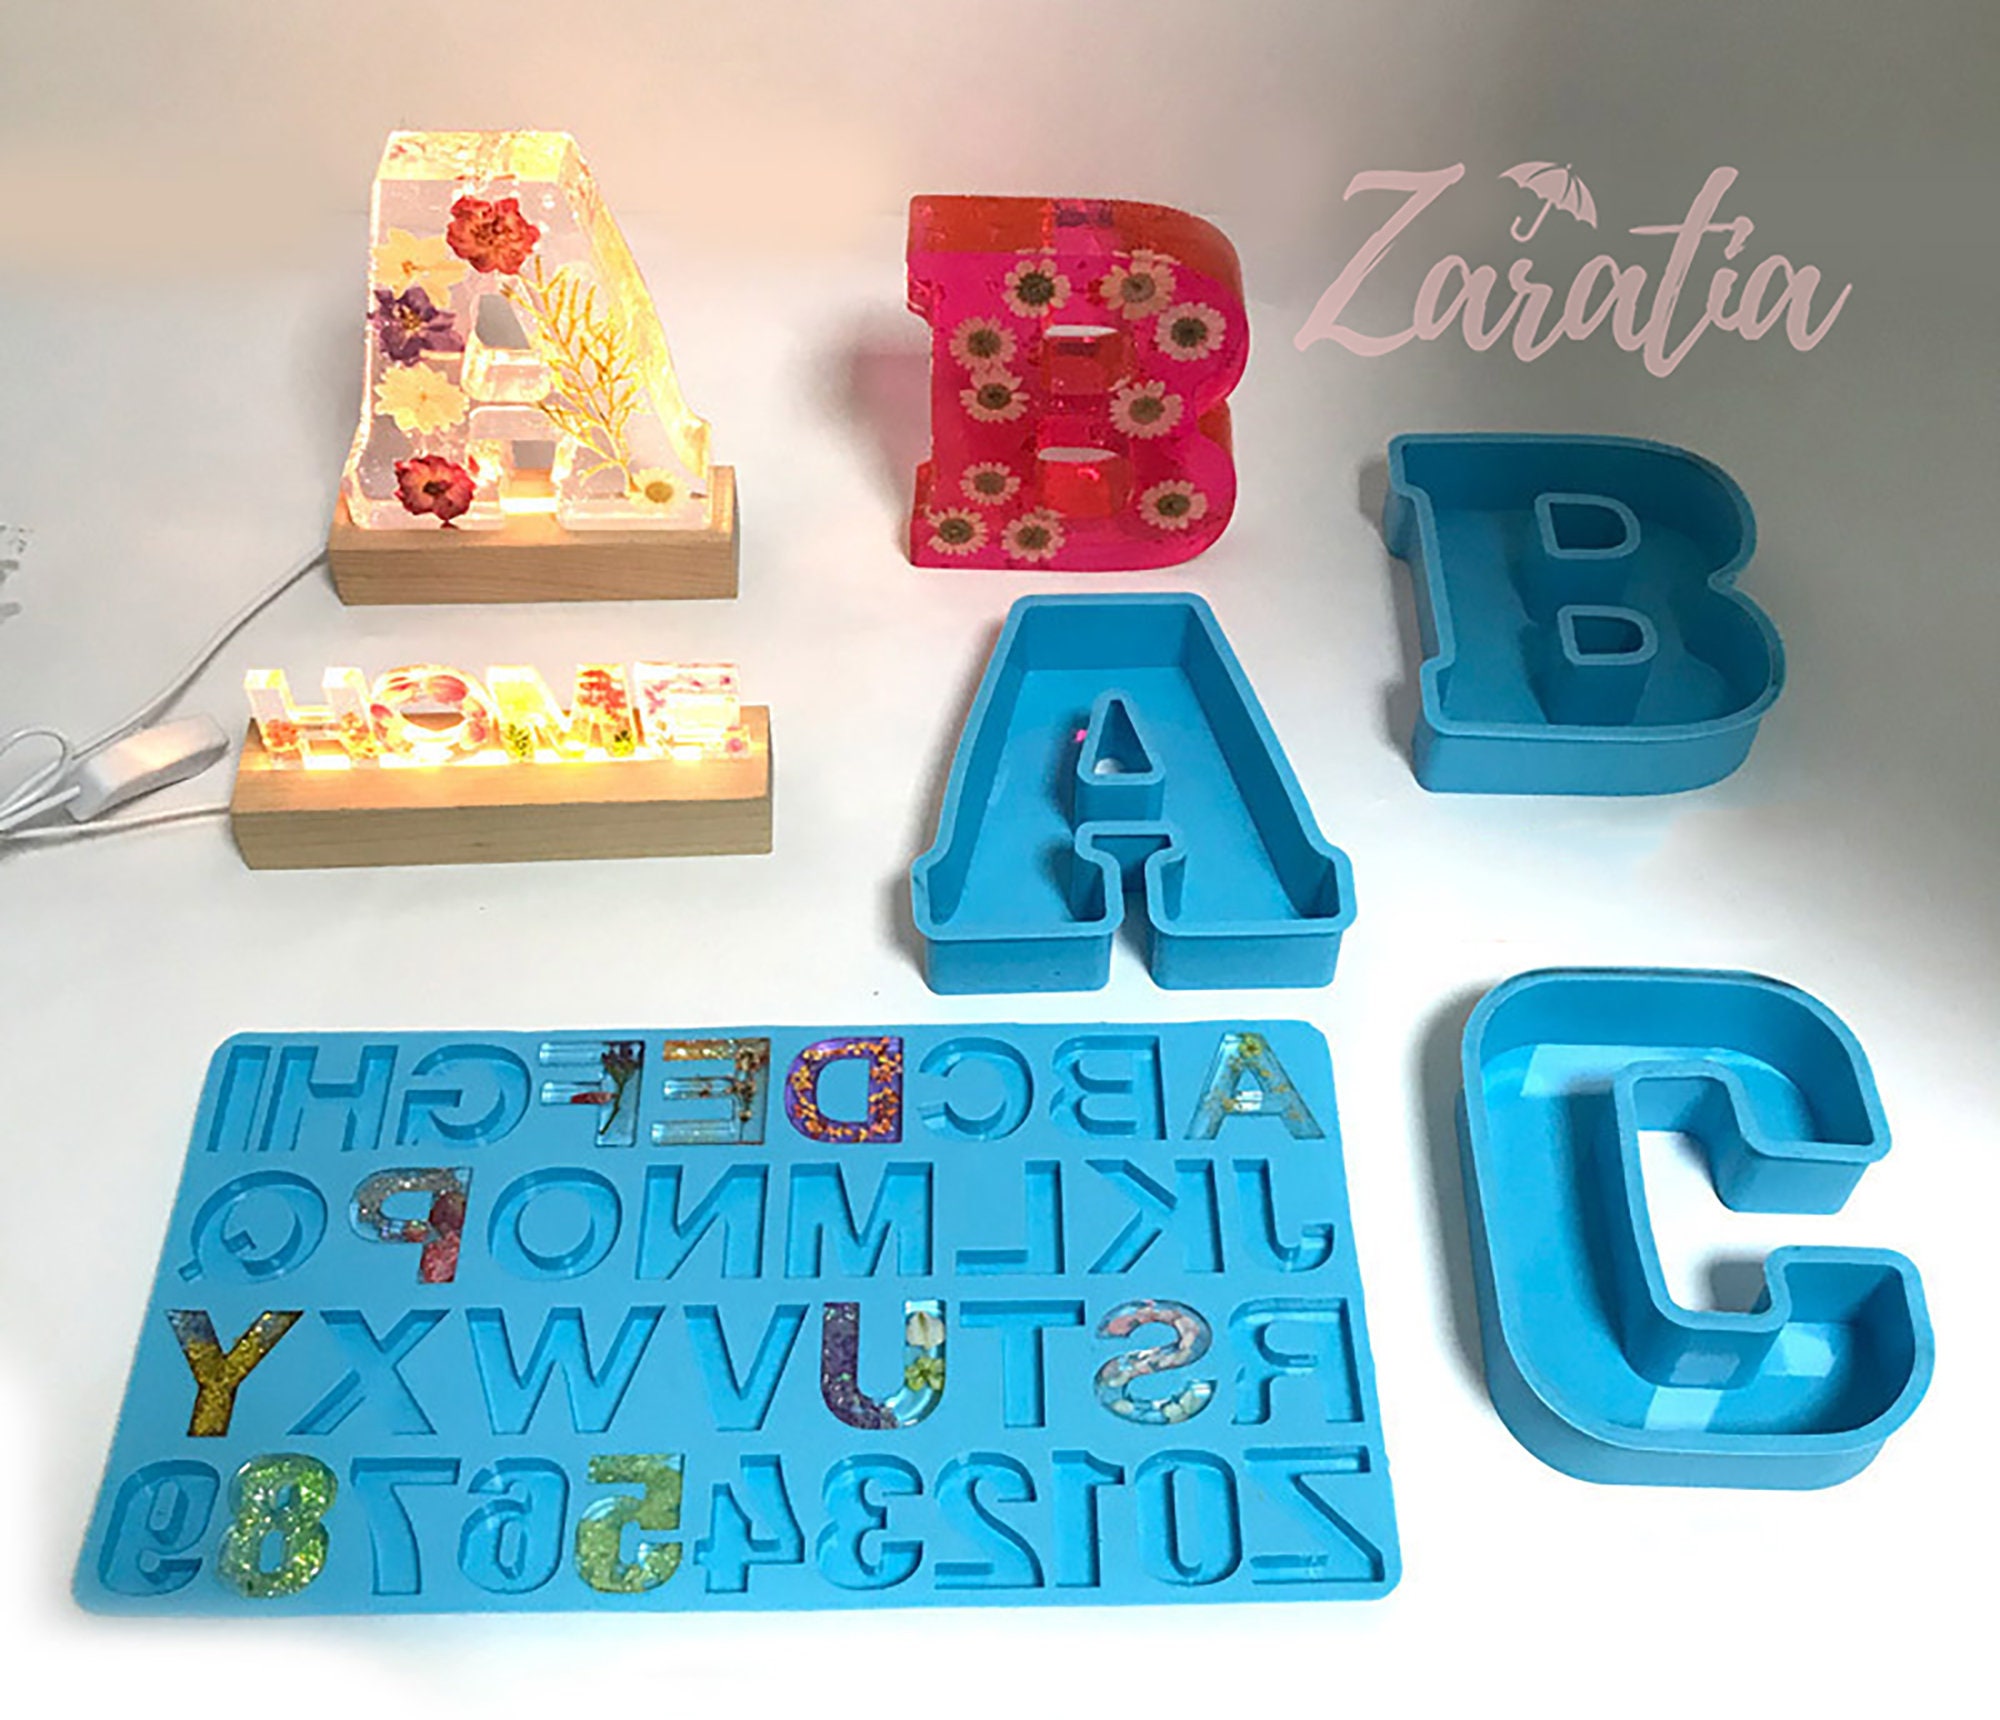 Full 26 Set A - Z Letters Mold, Silicone Mold, Resins Mold